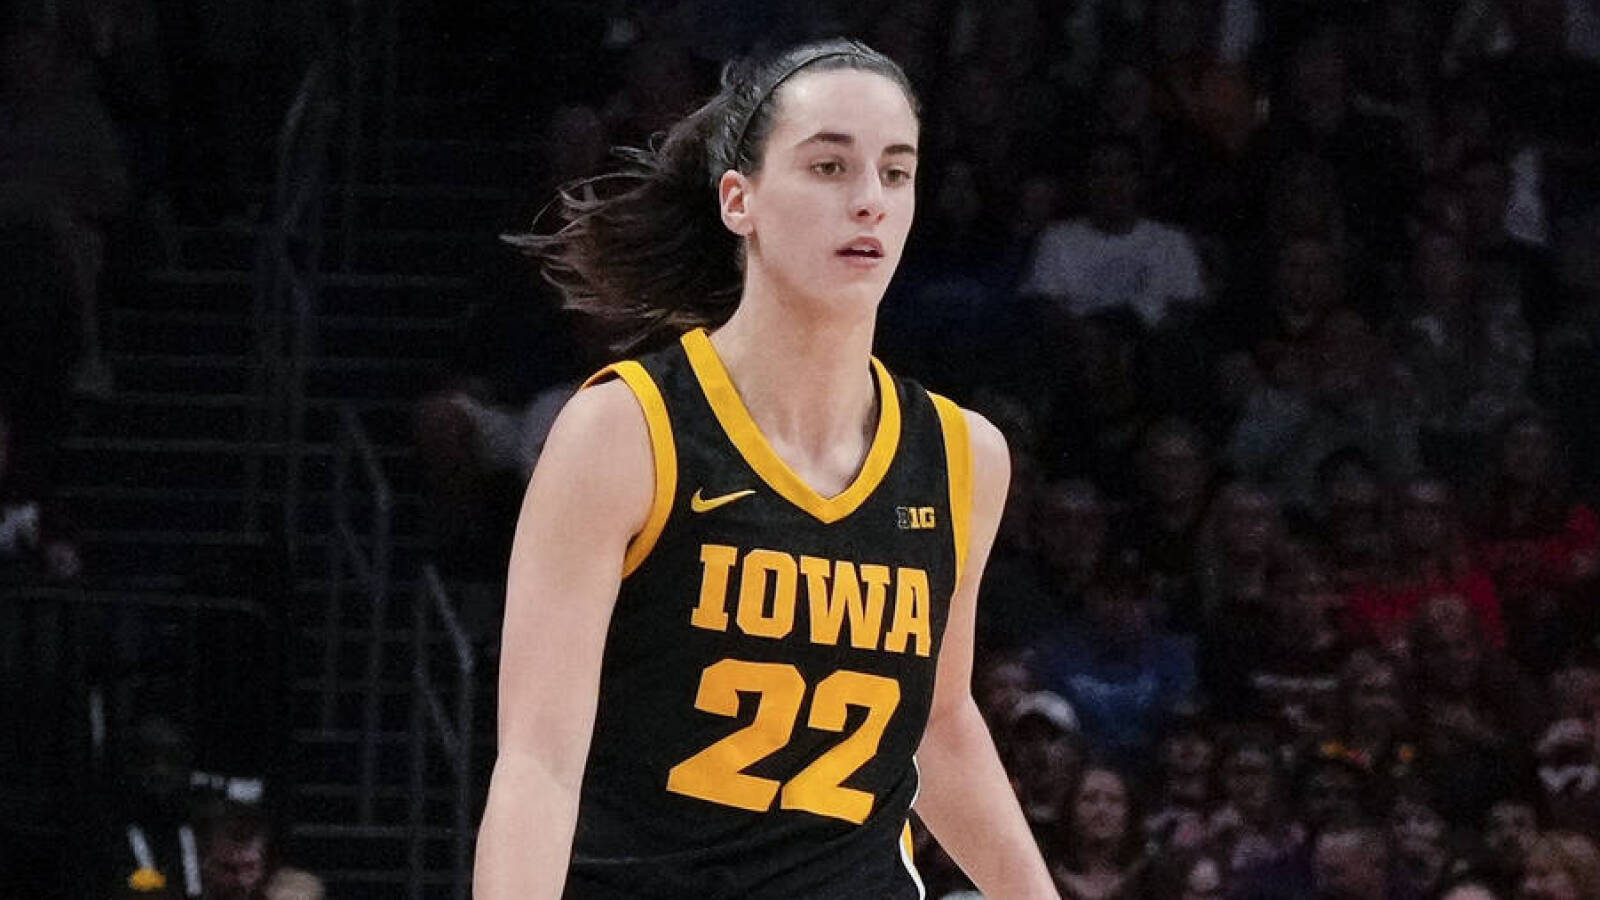 Iowa secures win with Caitlin Clark's dominant performance - Verve times